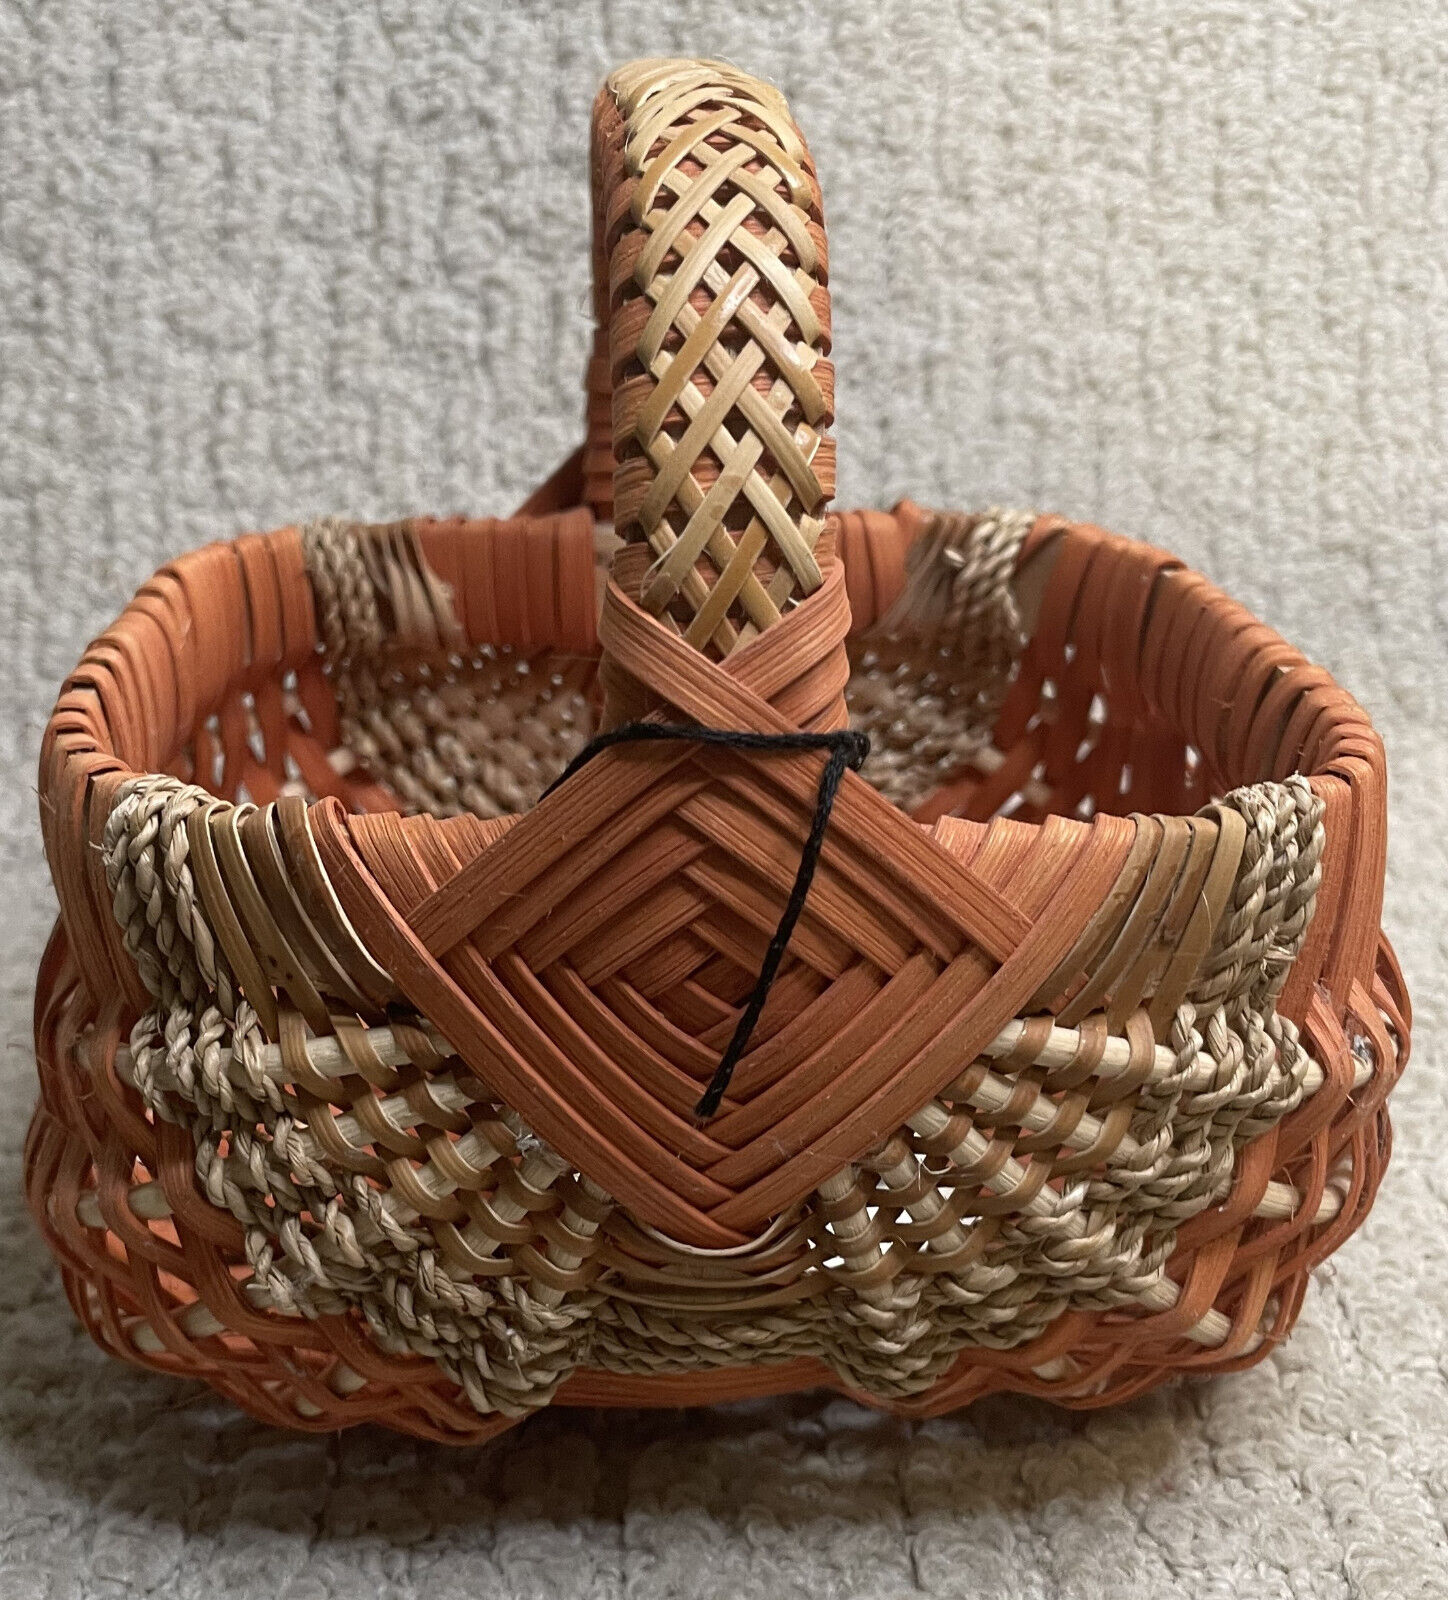 Anne Bowers Orange Natural Square Basket NWT Hand Crafted Medium